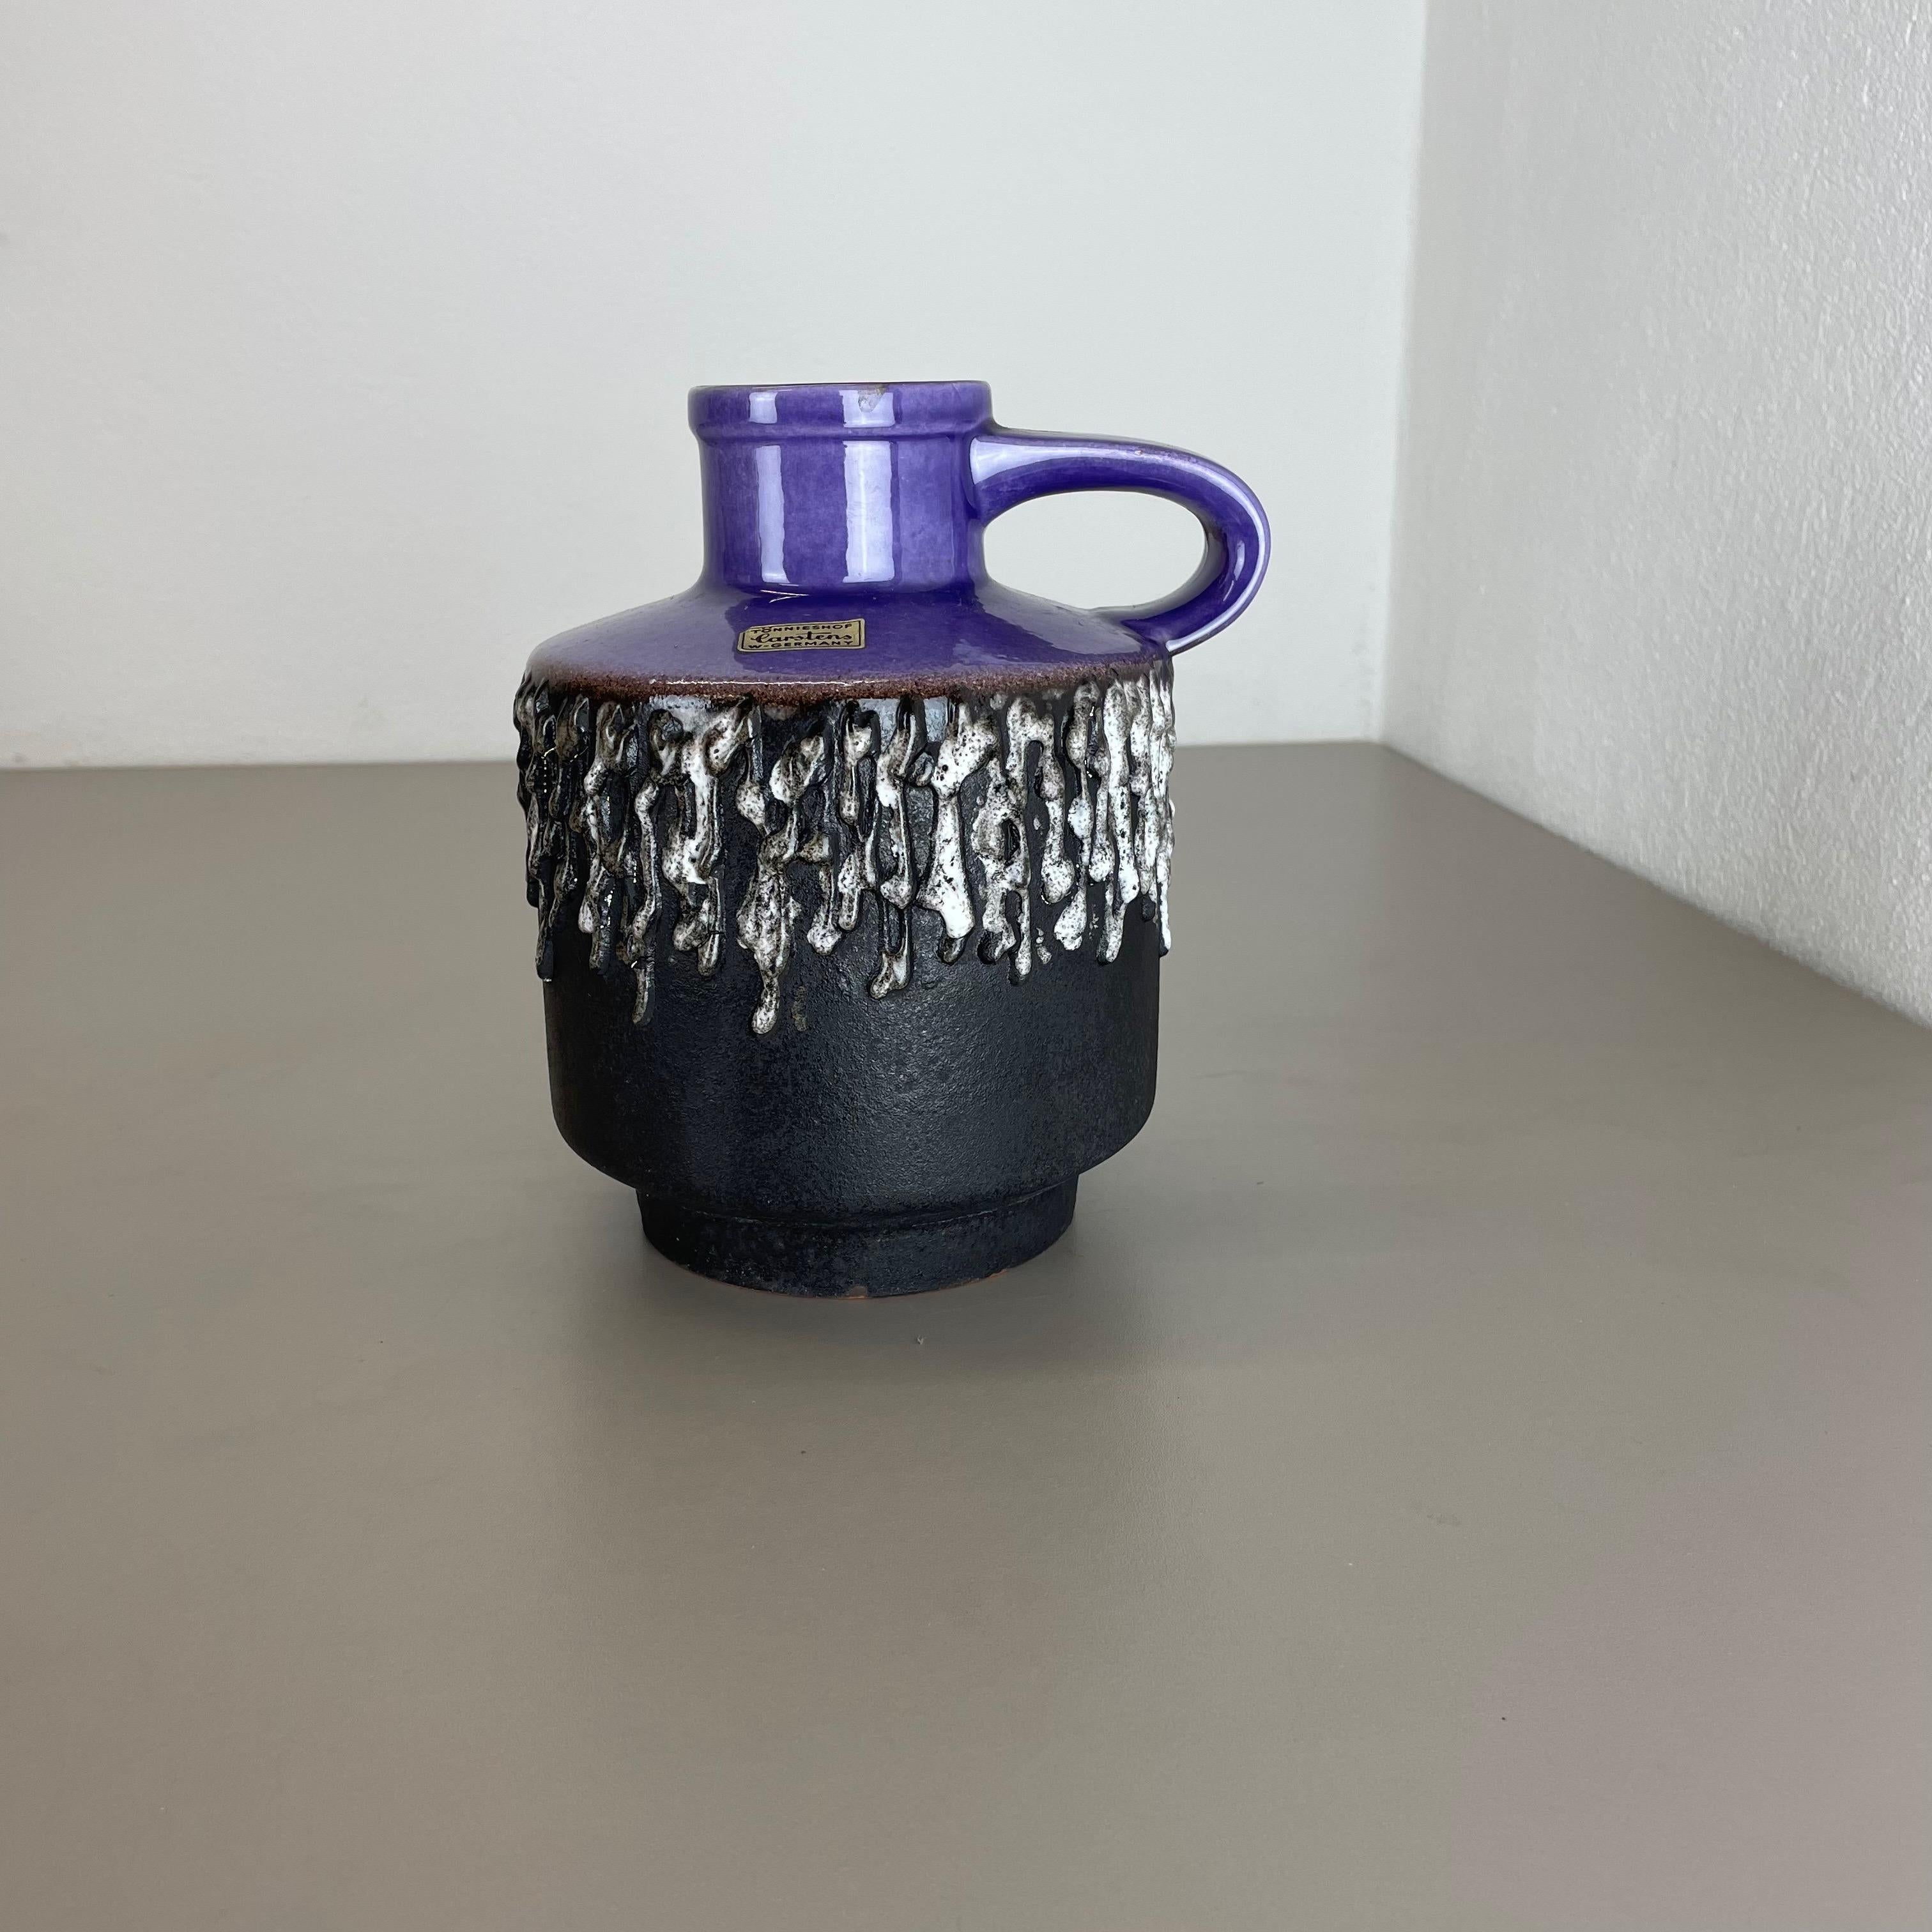 Article:

ceramic pottery vase.


Origin:

Germany.


Producer:

Carstens Tönnieshof, Germany.


Decade:

1970s.


This original vintage pottery object was designed and produced by Cartens Tönnieshof in the 1970s in Germany. It